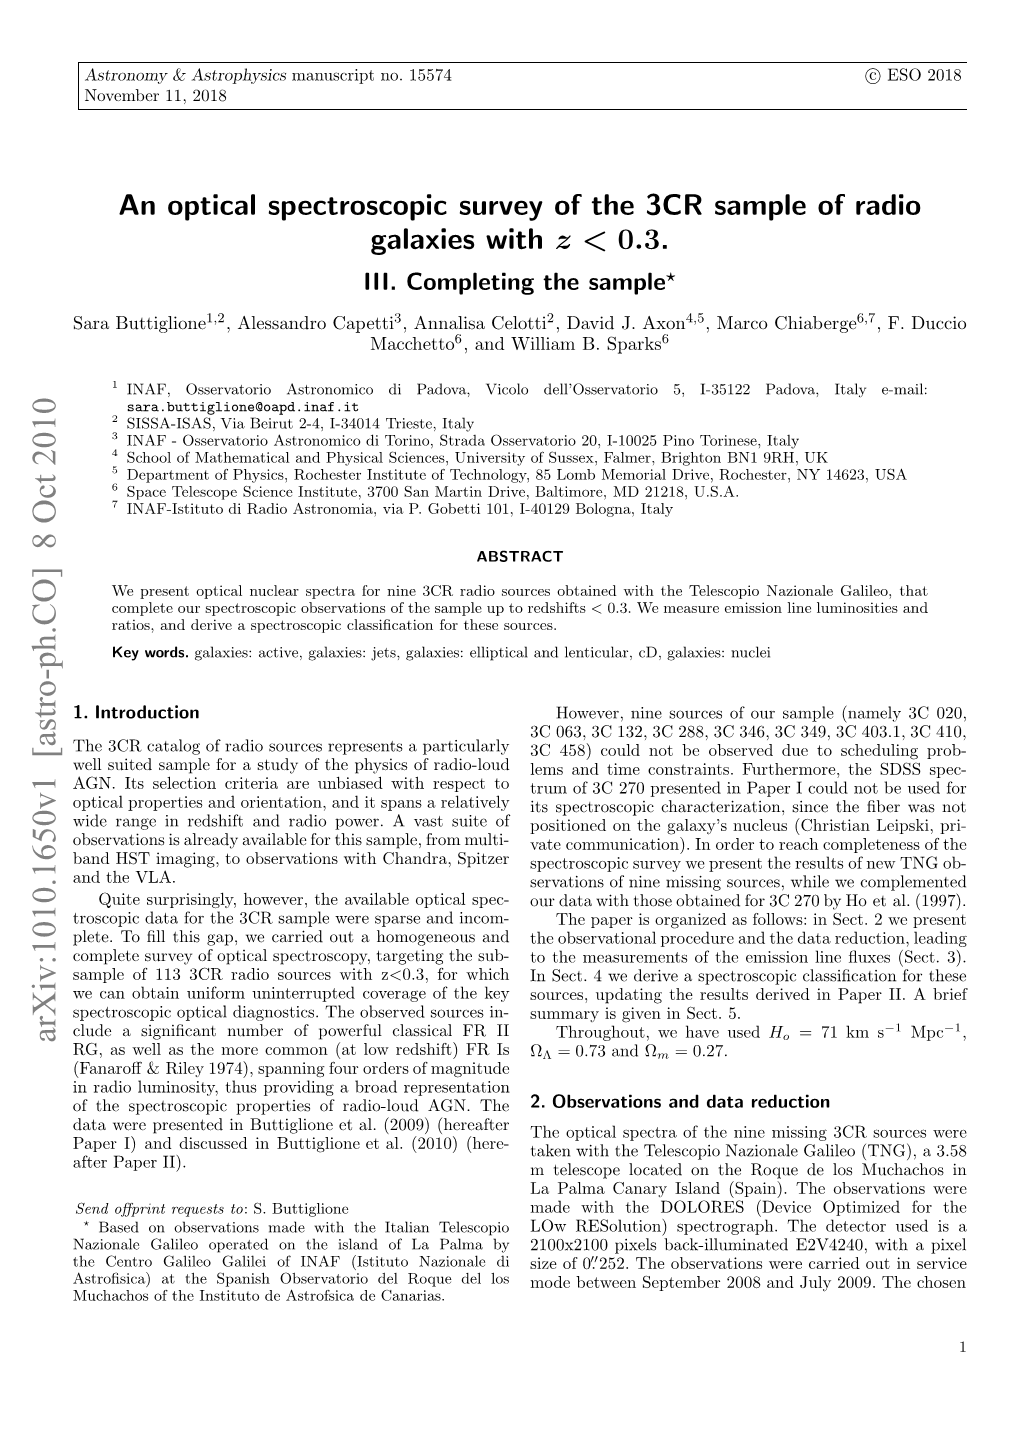 An Optical Spectroscopic Survey of the 3CR Sample of Radio Galaxies with Z&lt; 0.3. III. Completing the Sample